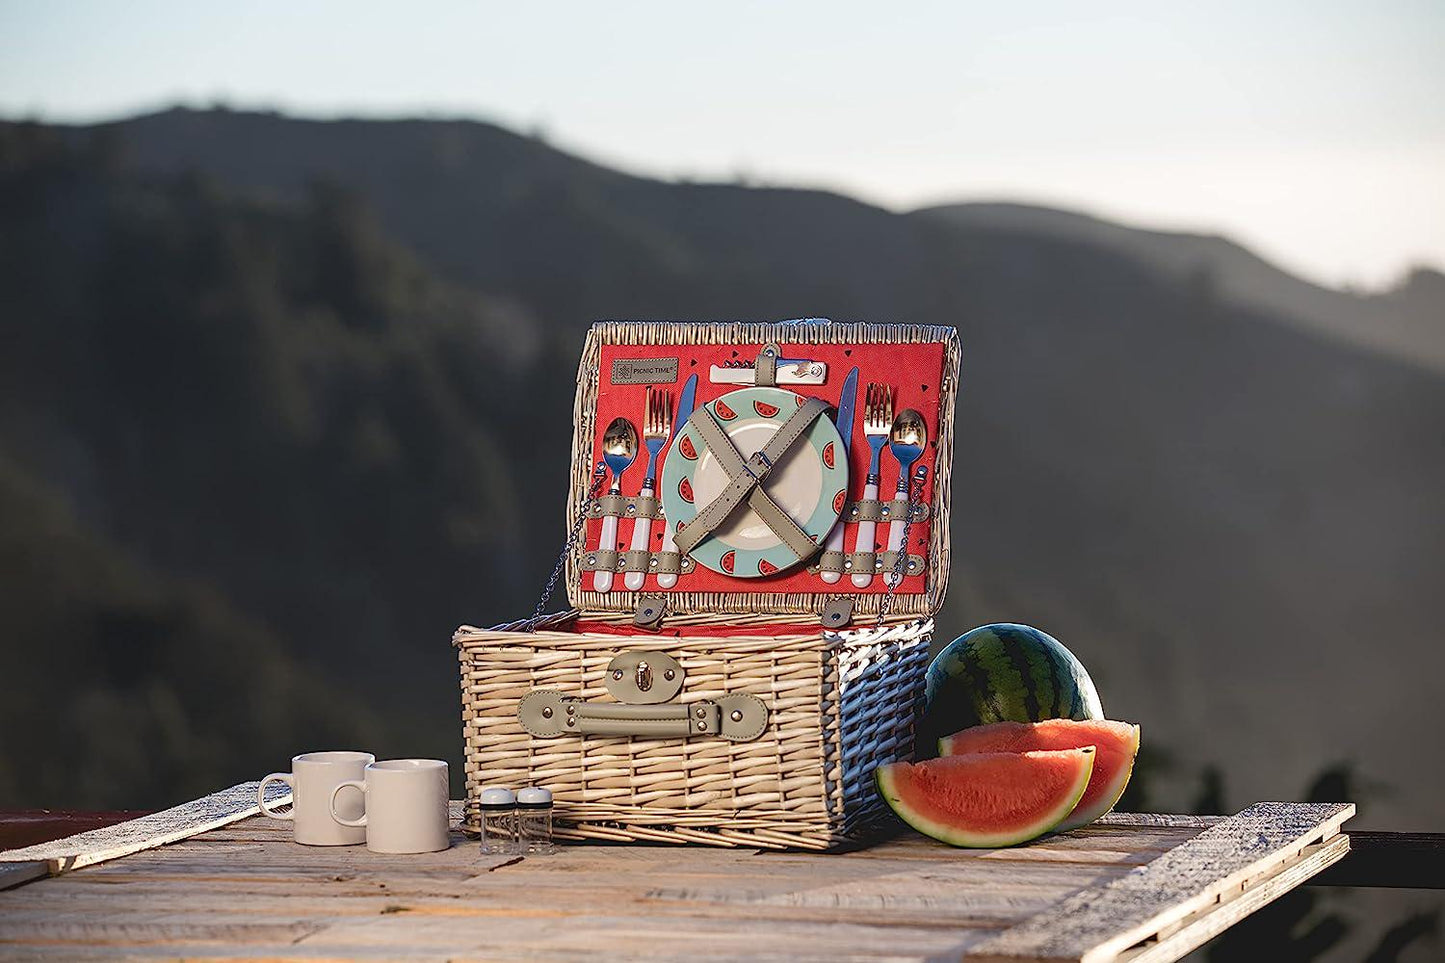 PICNIC TIME Catalina Picnic Basket for 2 - Wicker Picnic Basket with Picnic Set, (Vista Blue with Red Watermelon Pattern)